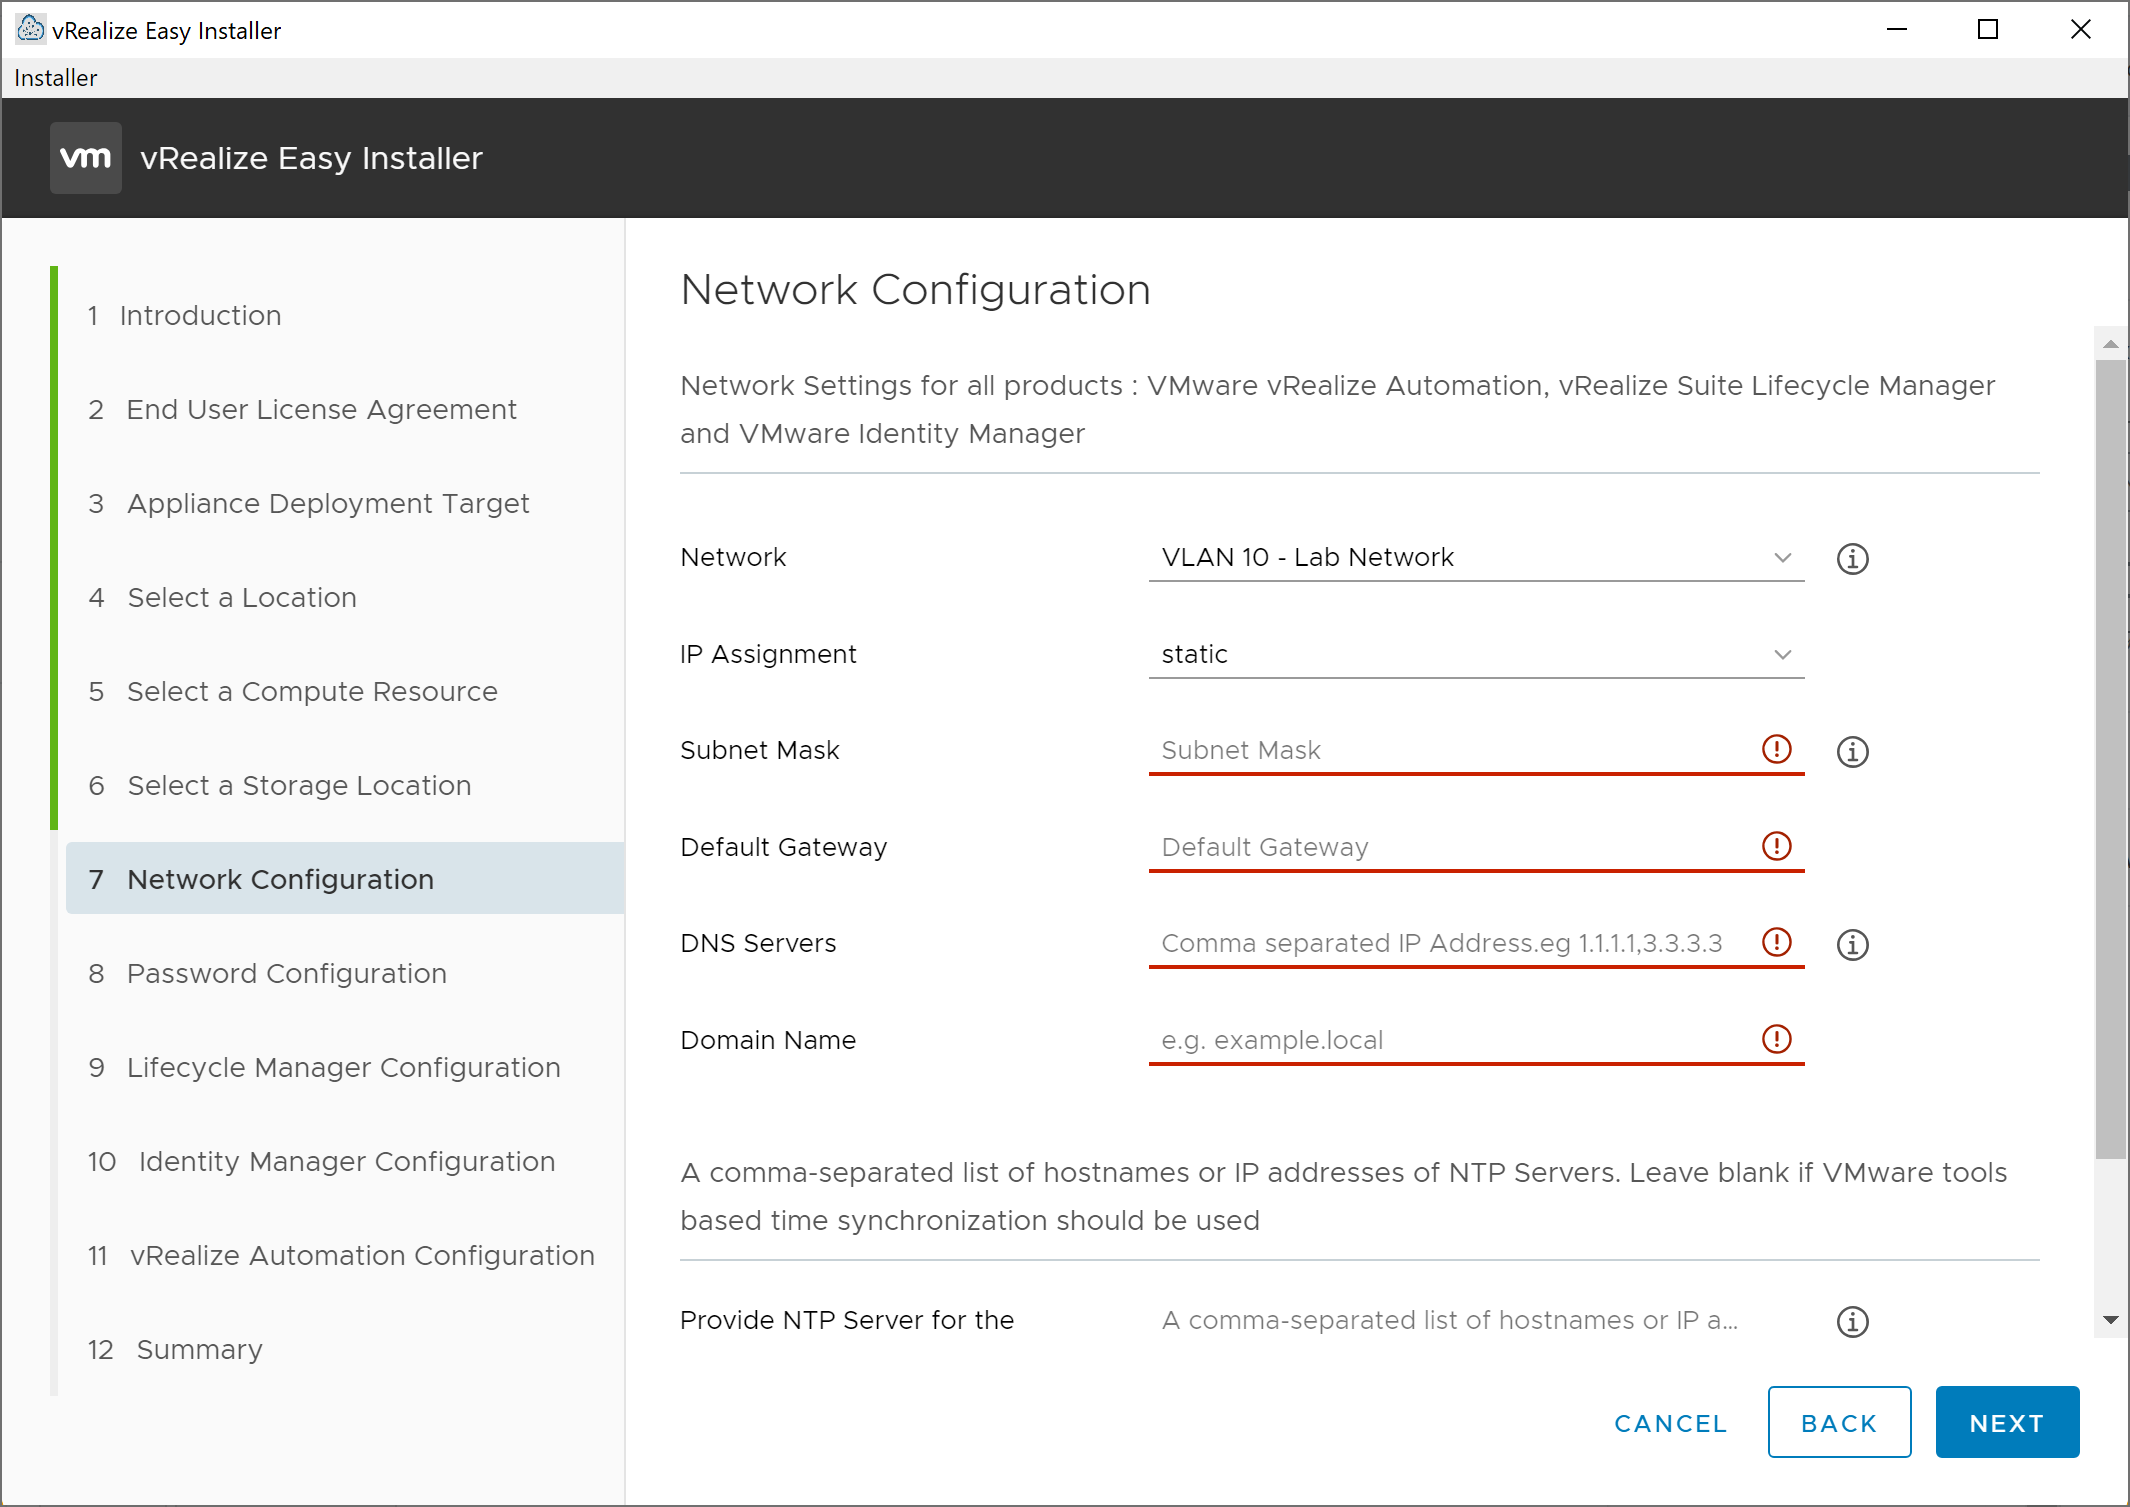 vRealize Easy Installer - New Install - Network Configuration